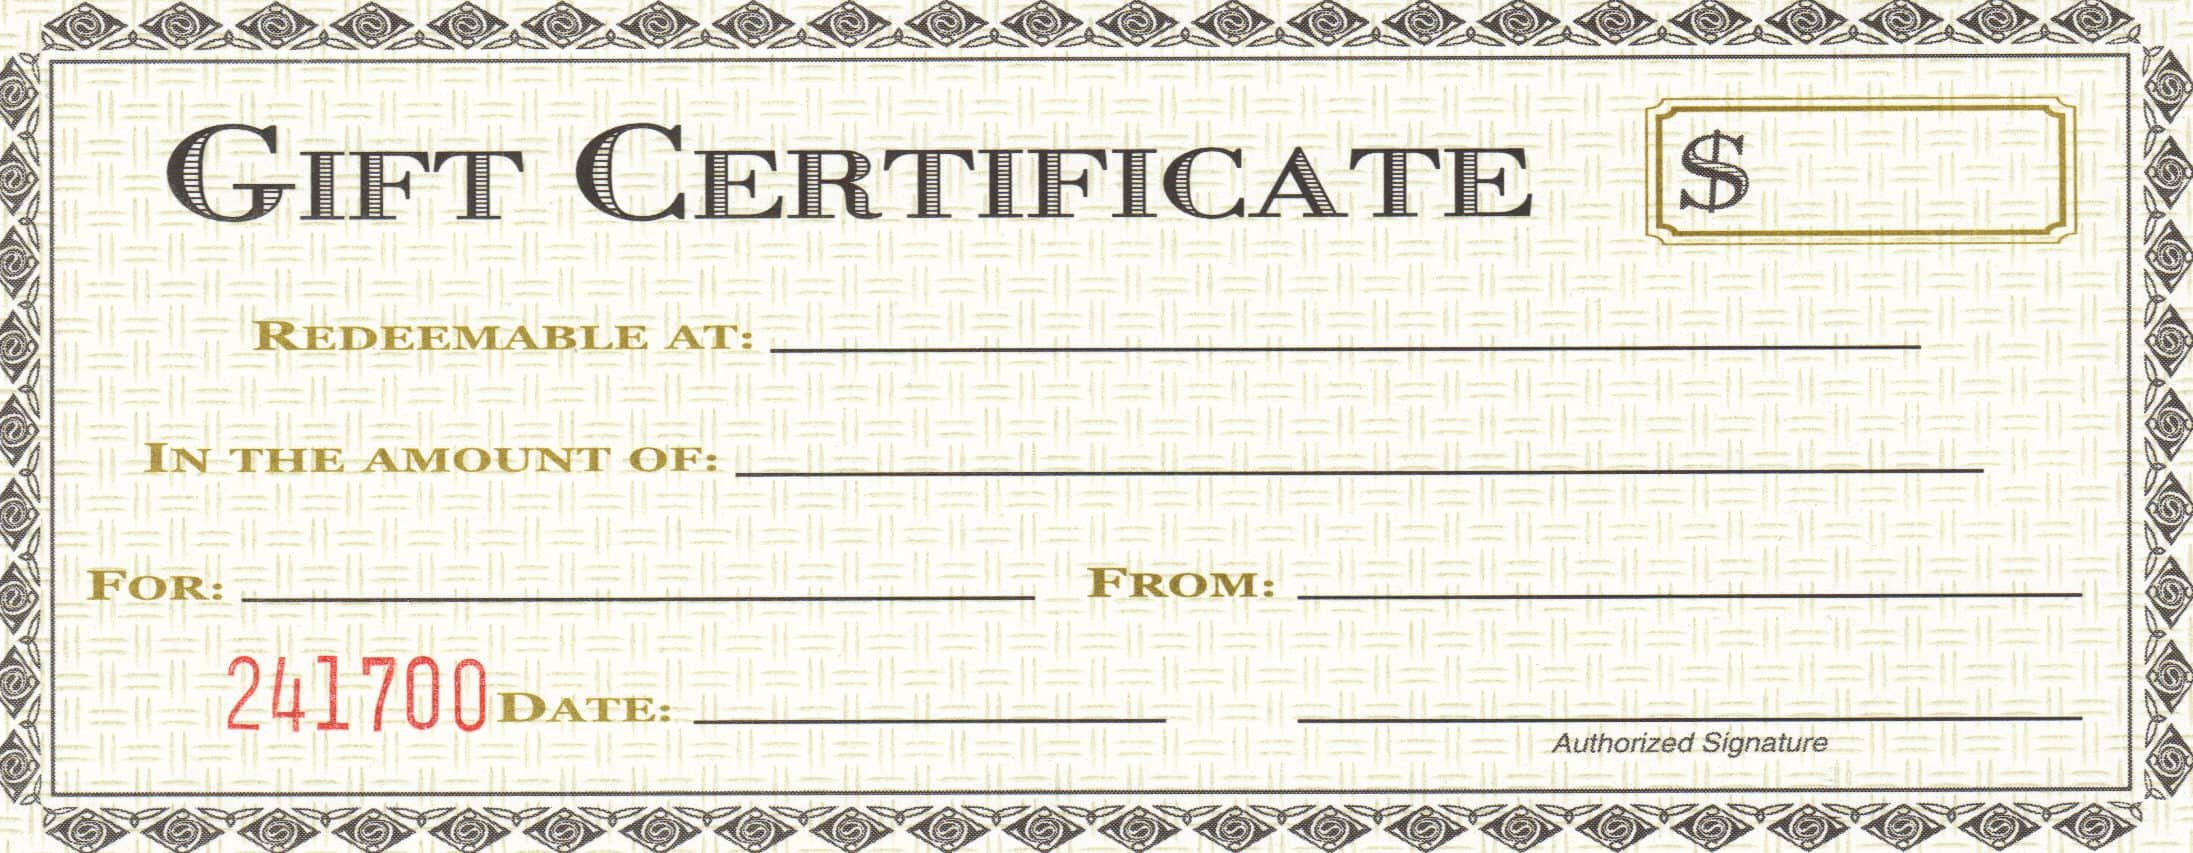 Gift Certificate Template Word 18 Gift Certificate Templates Excel Pdf formats